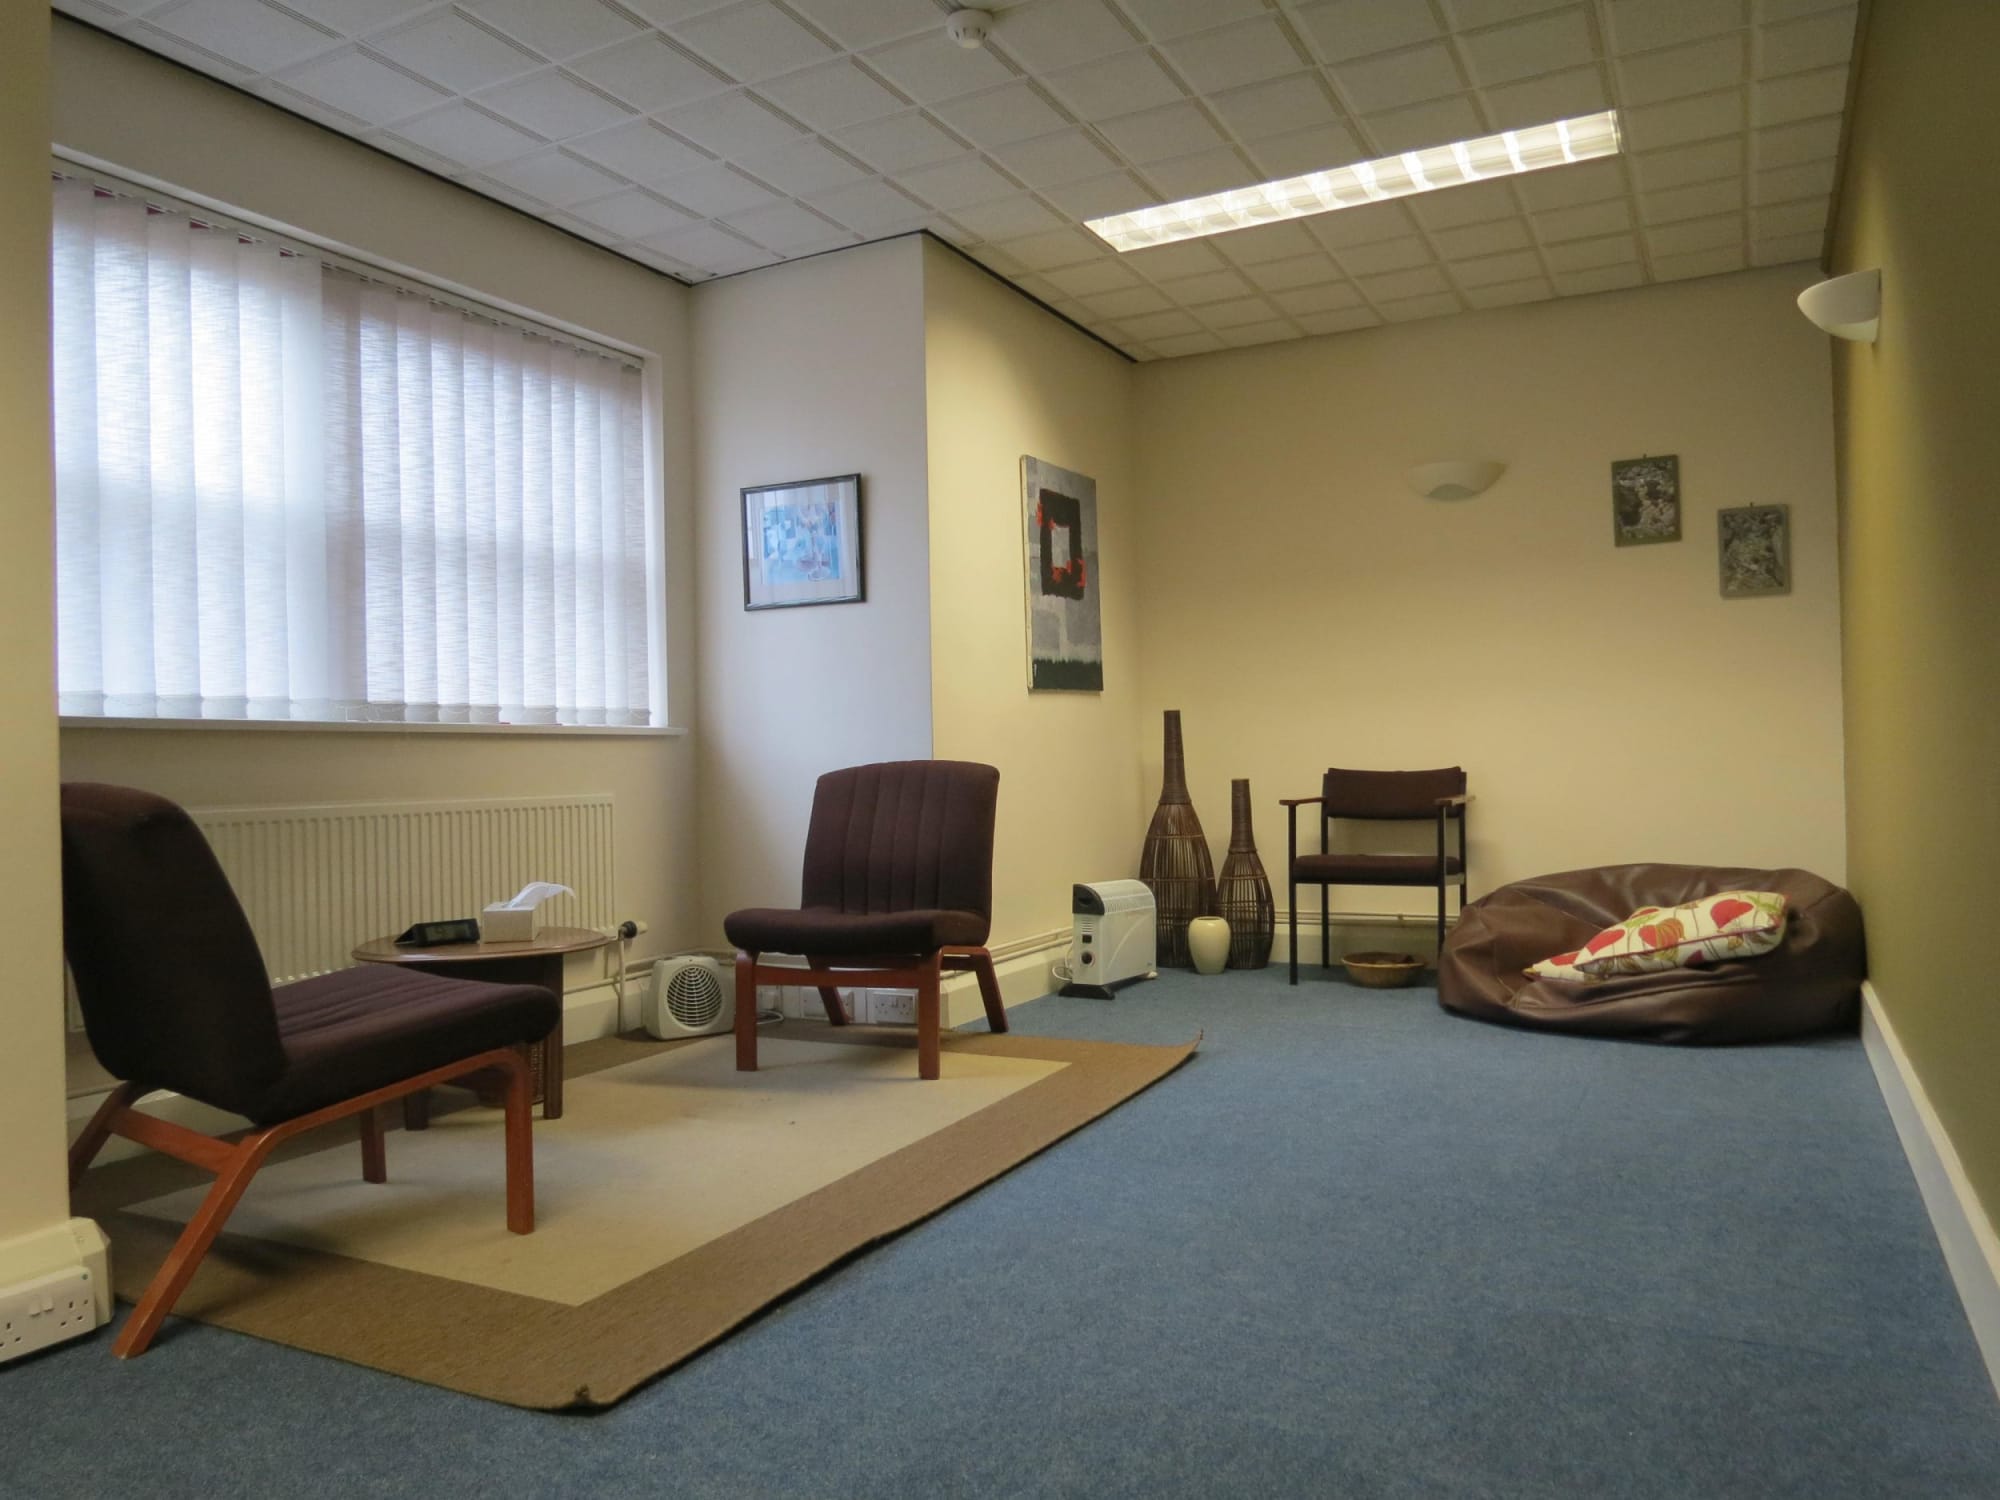 Image shows a large therapy room at Nottingham Counselling Service. There are two comfy chairs facing each other over a small coffee table in front of a window letting in natural light to the left. To the right there is another chair and a brown leat